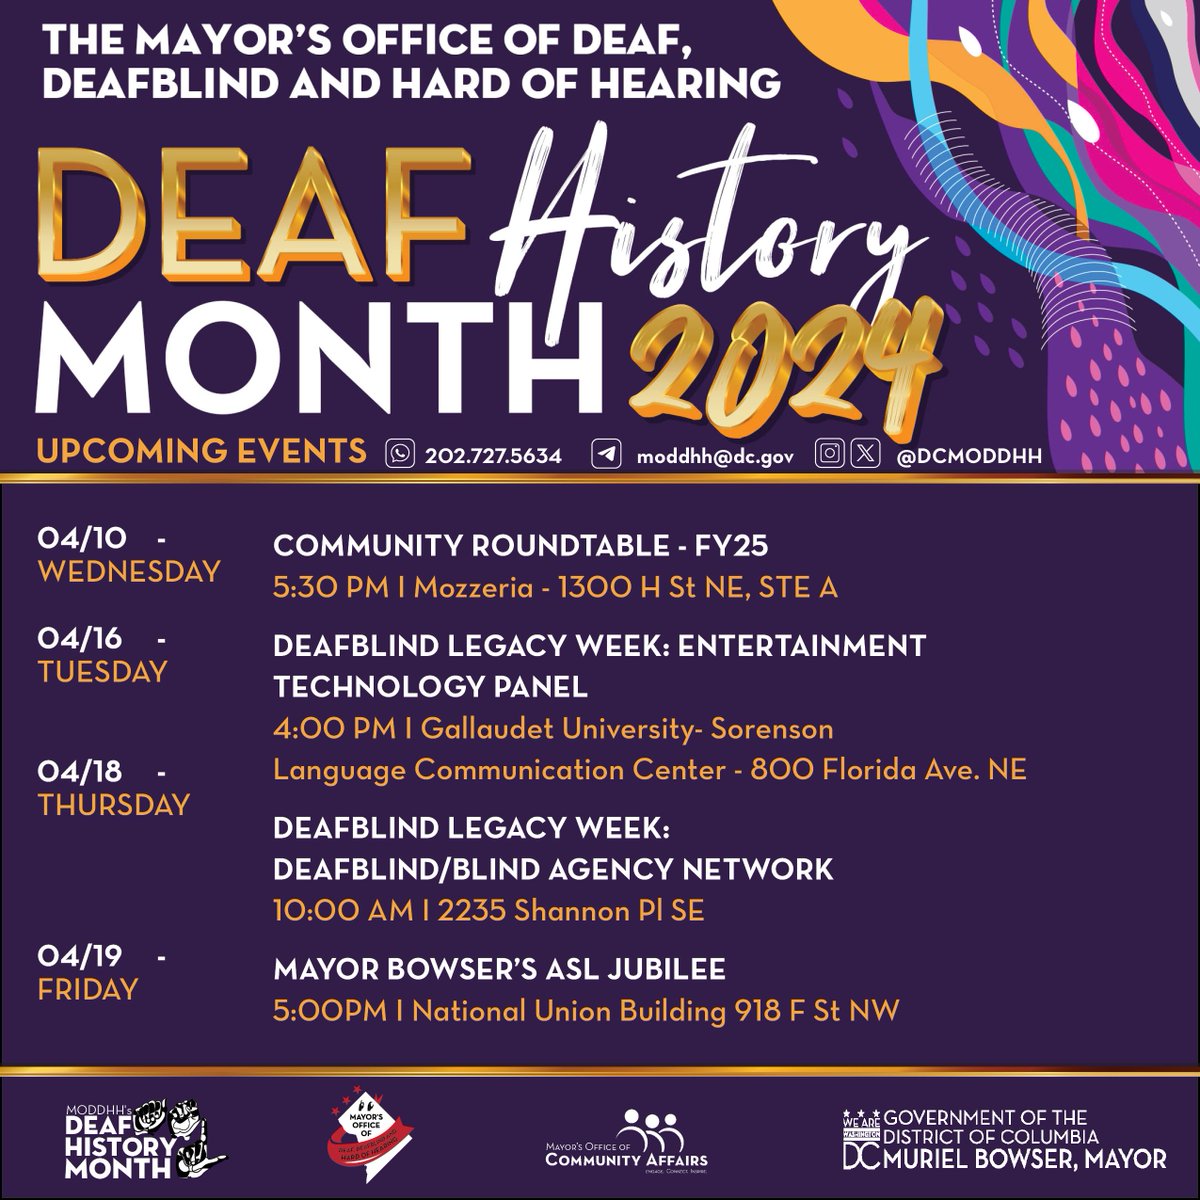 April is Deaf History Month and there are still 2 more opportunities to celebrate with @dcmoddhh: 🗓️April 18: DeafBlind/Blind Agency Network 🗓️April 19: ASL Jubilee Learn more and join us⬇️